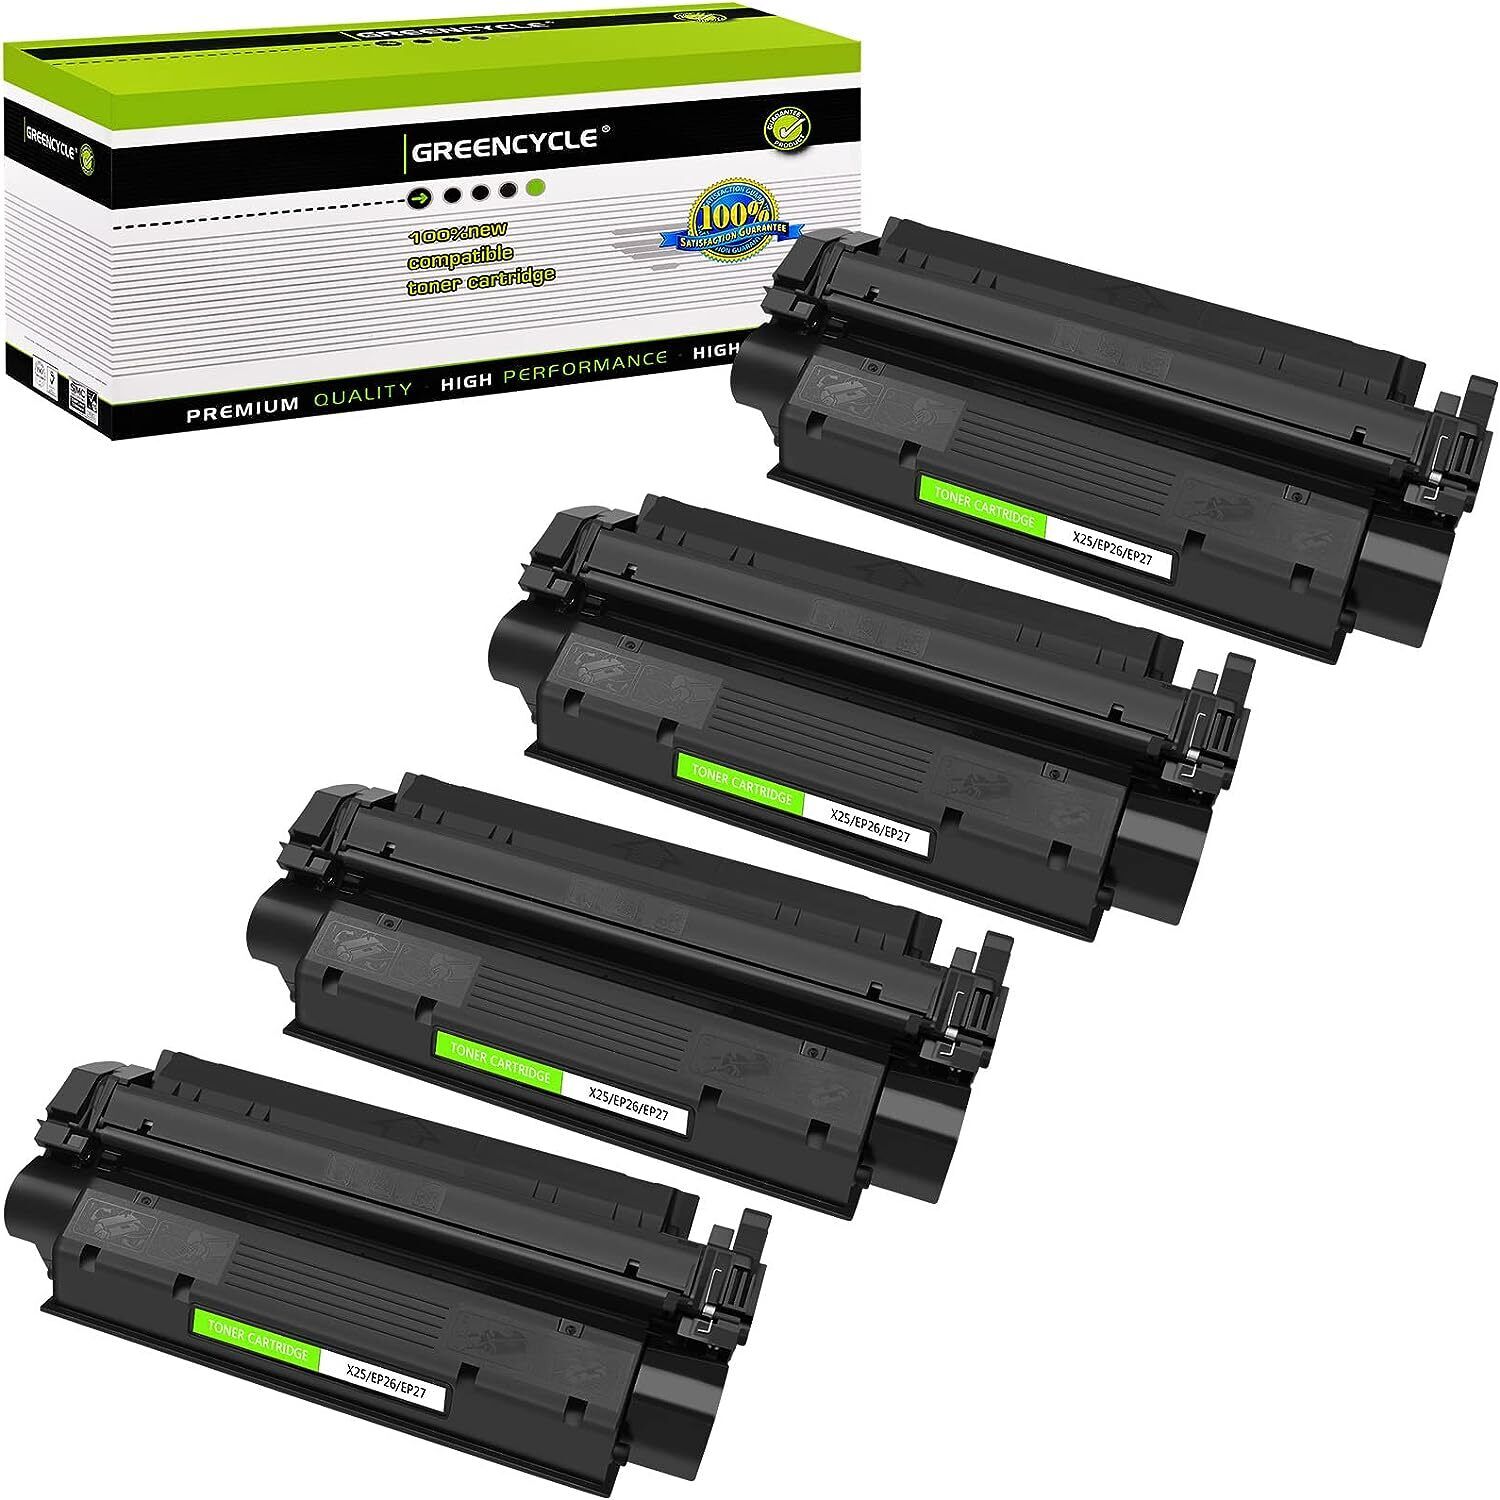 4PK GREENCYCLE X25 EP26 EP27 High Yield Toner Cartridge Fits for Canon MF5530